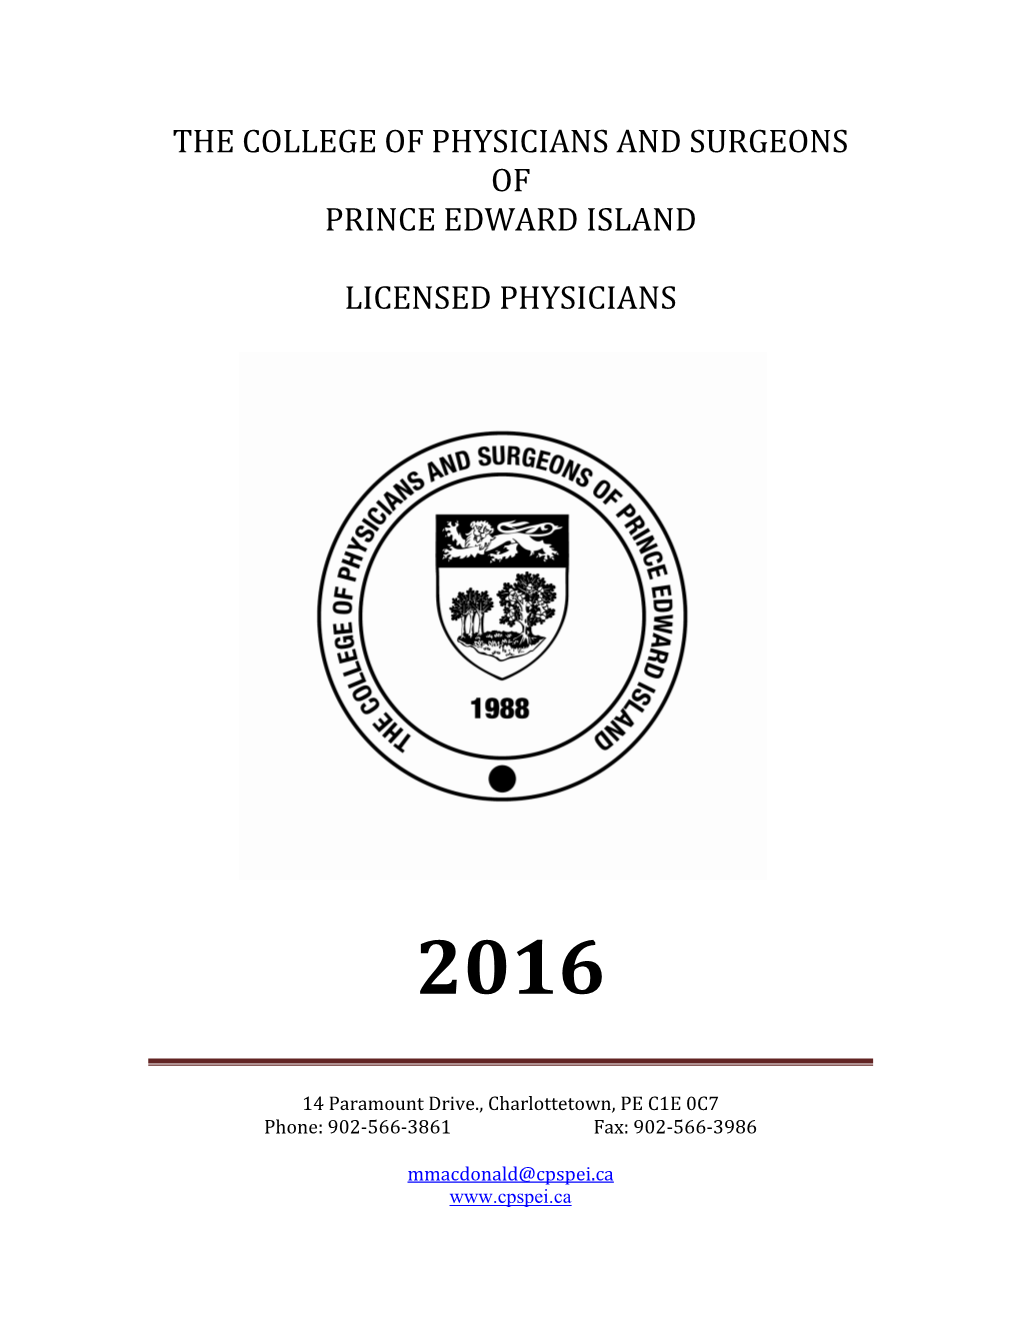 The College of Physicians and Surgeons of Prince Edward Island